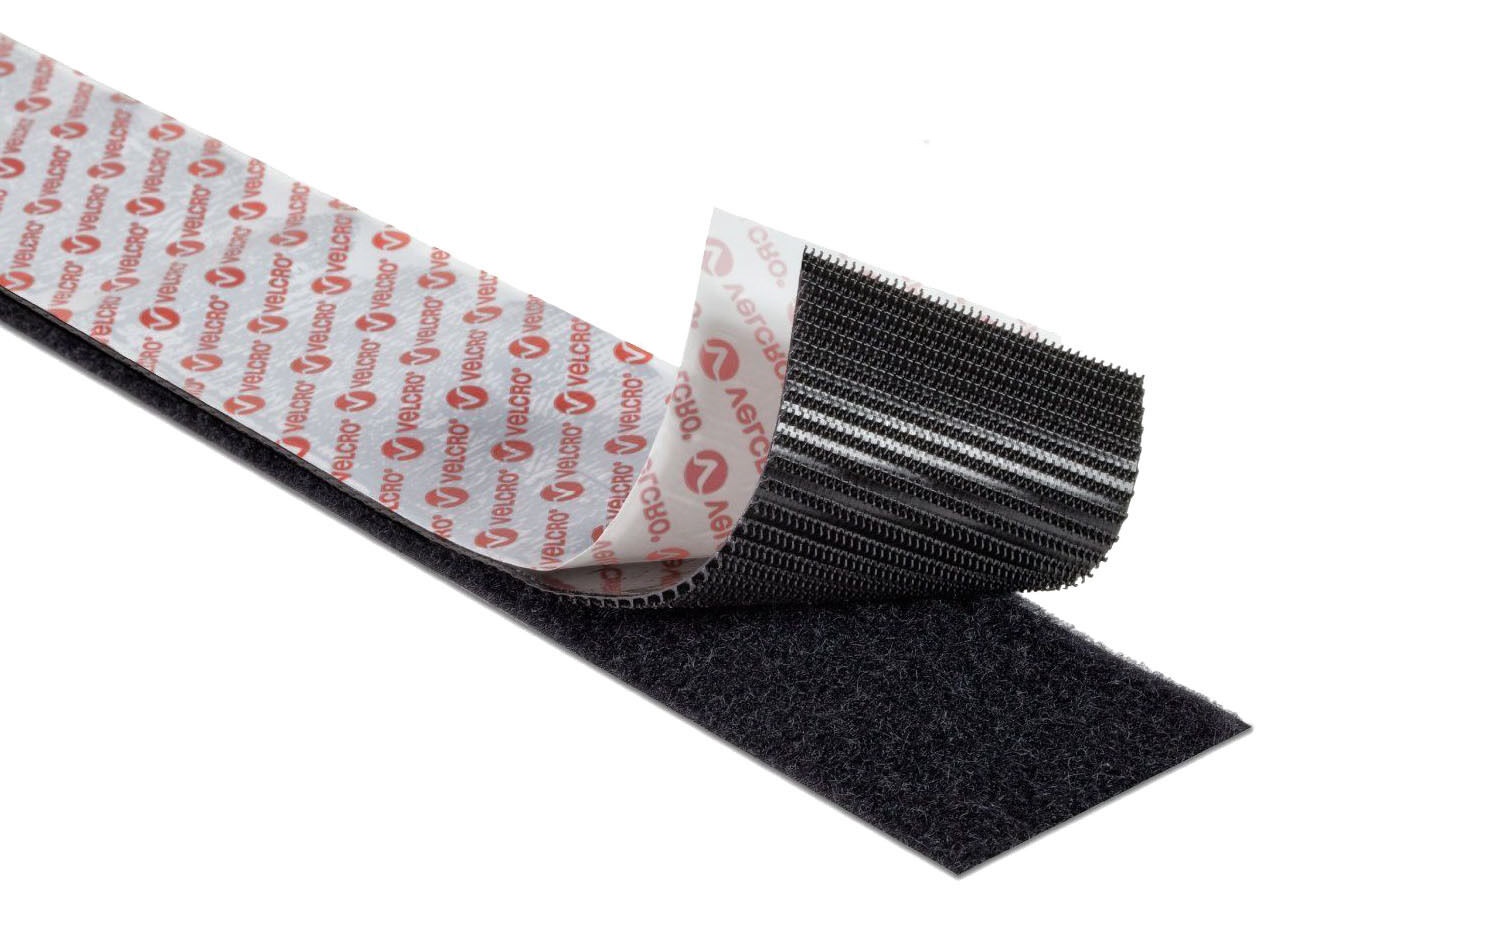 VELCRO Industrial Strength 3' x 1' Low Profile - Black (1 Roll